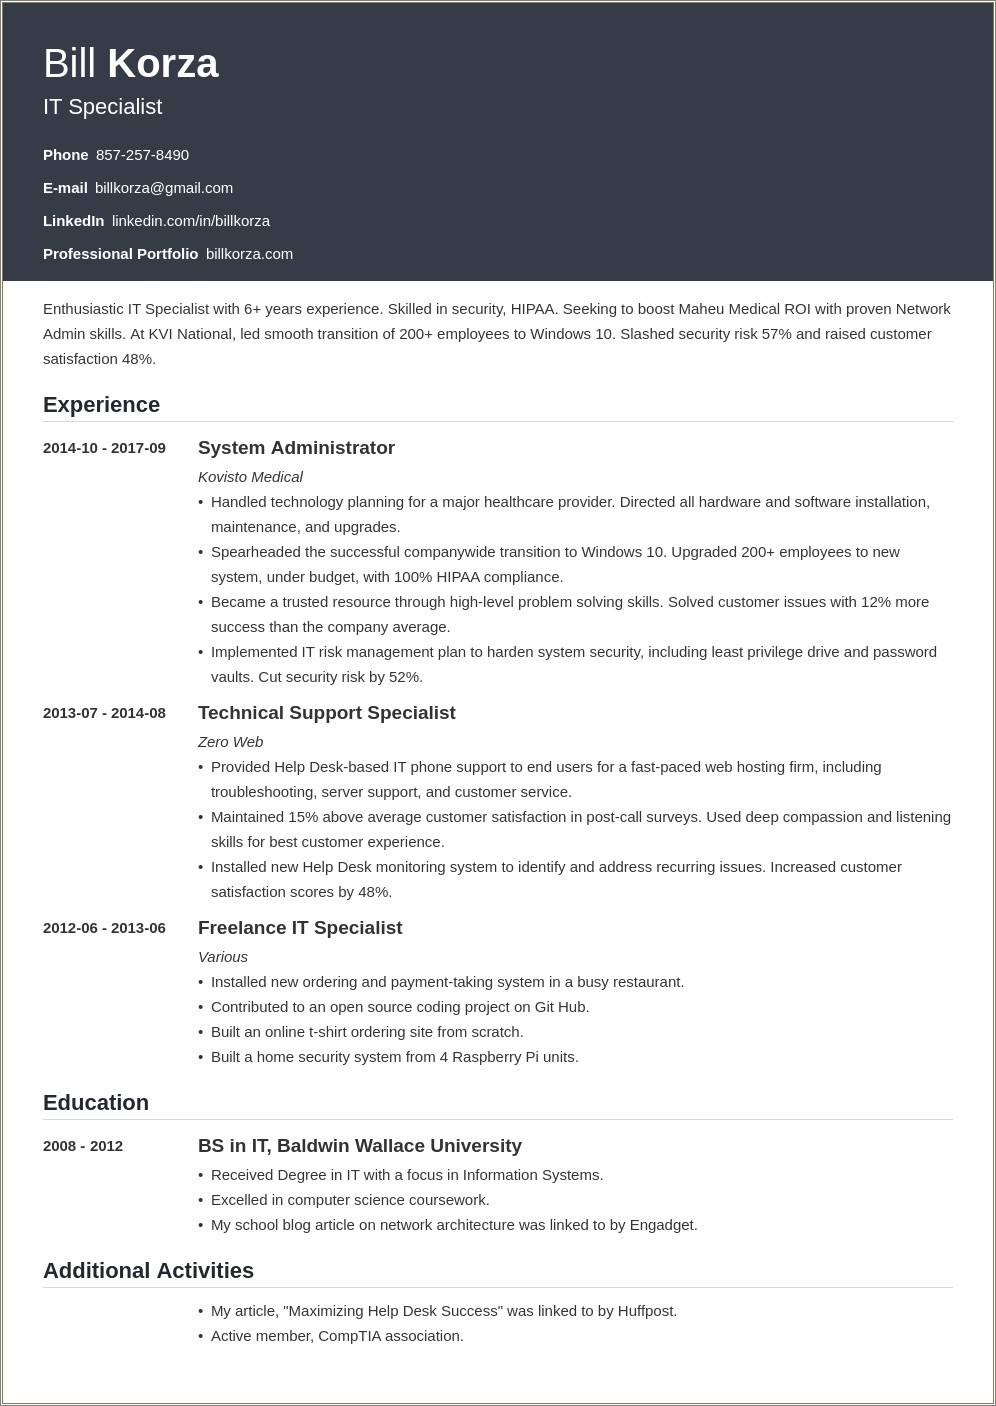 Examples Of Well Written Resume Profiles